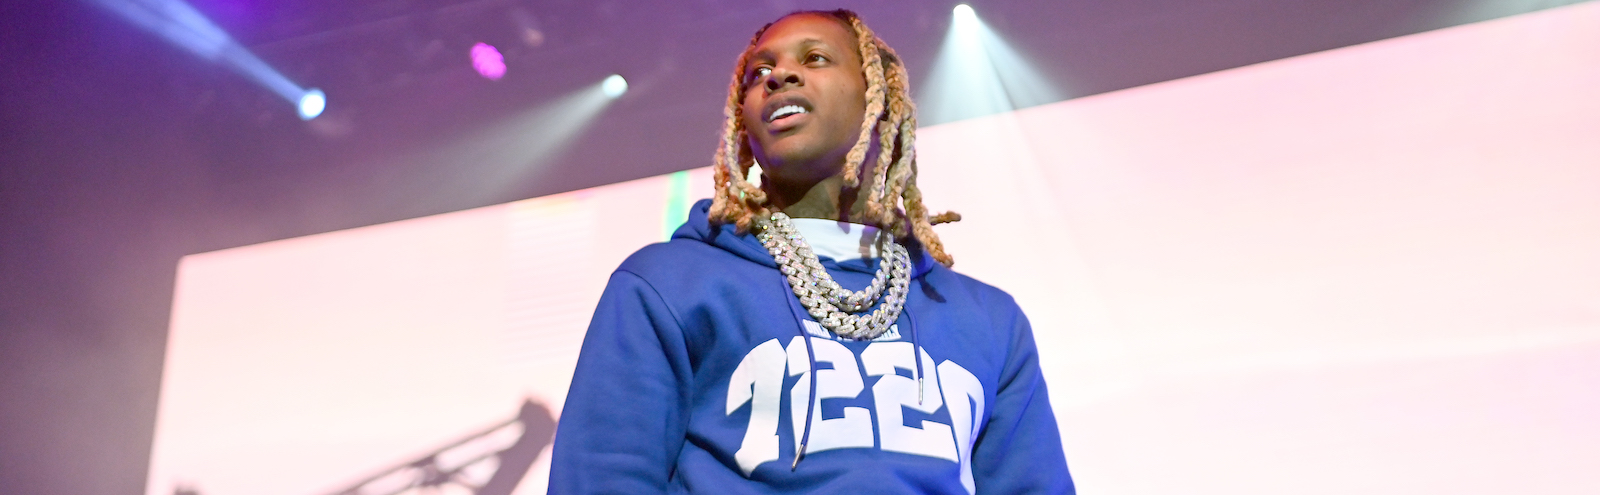 Lil Durk's Metaverse Takeover Celebrated On Times Square - FM HIP HOP